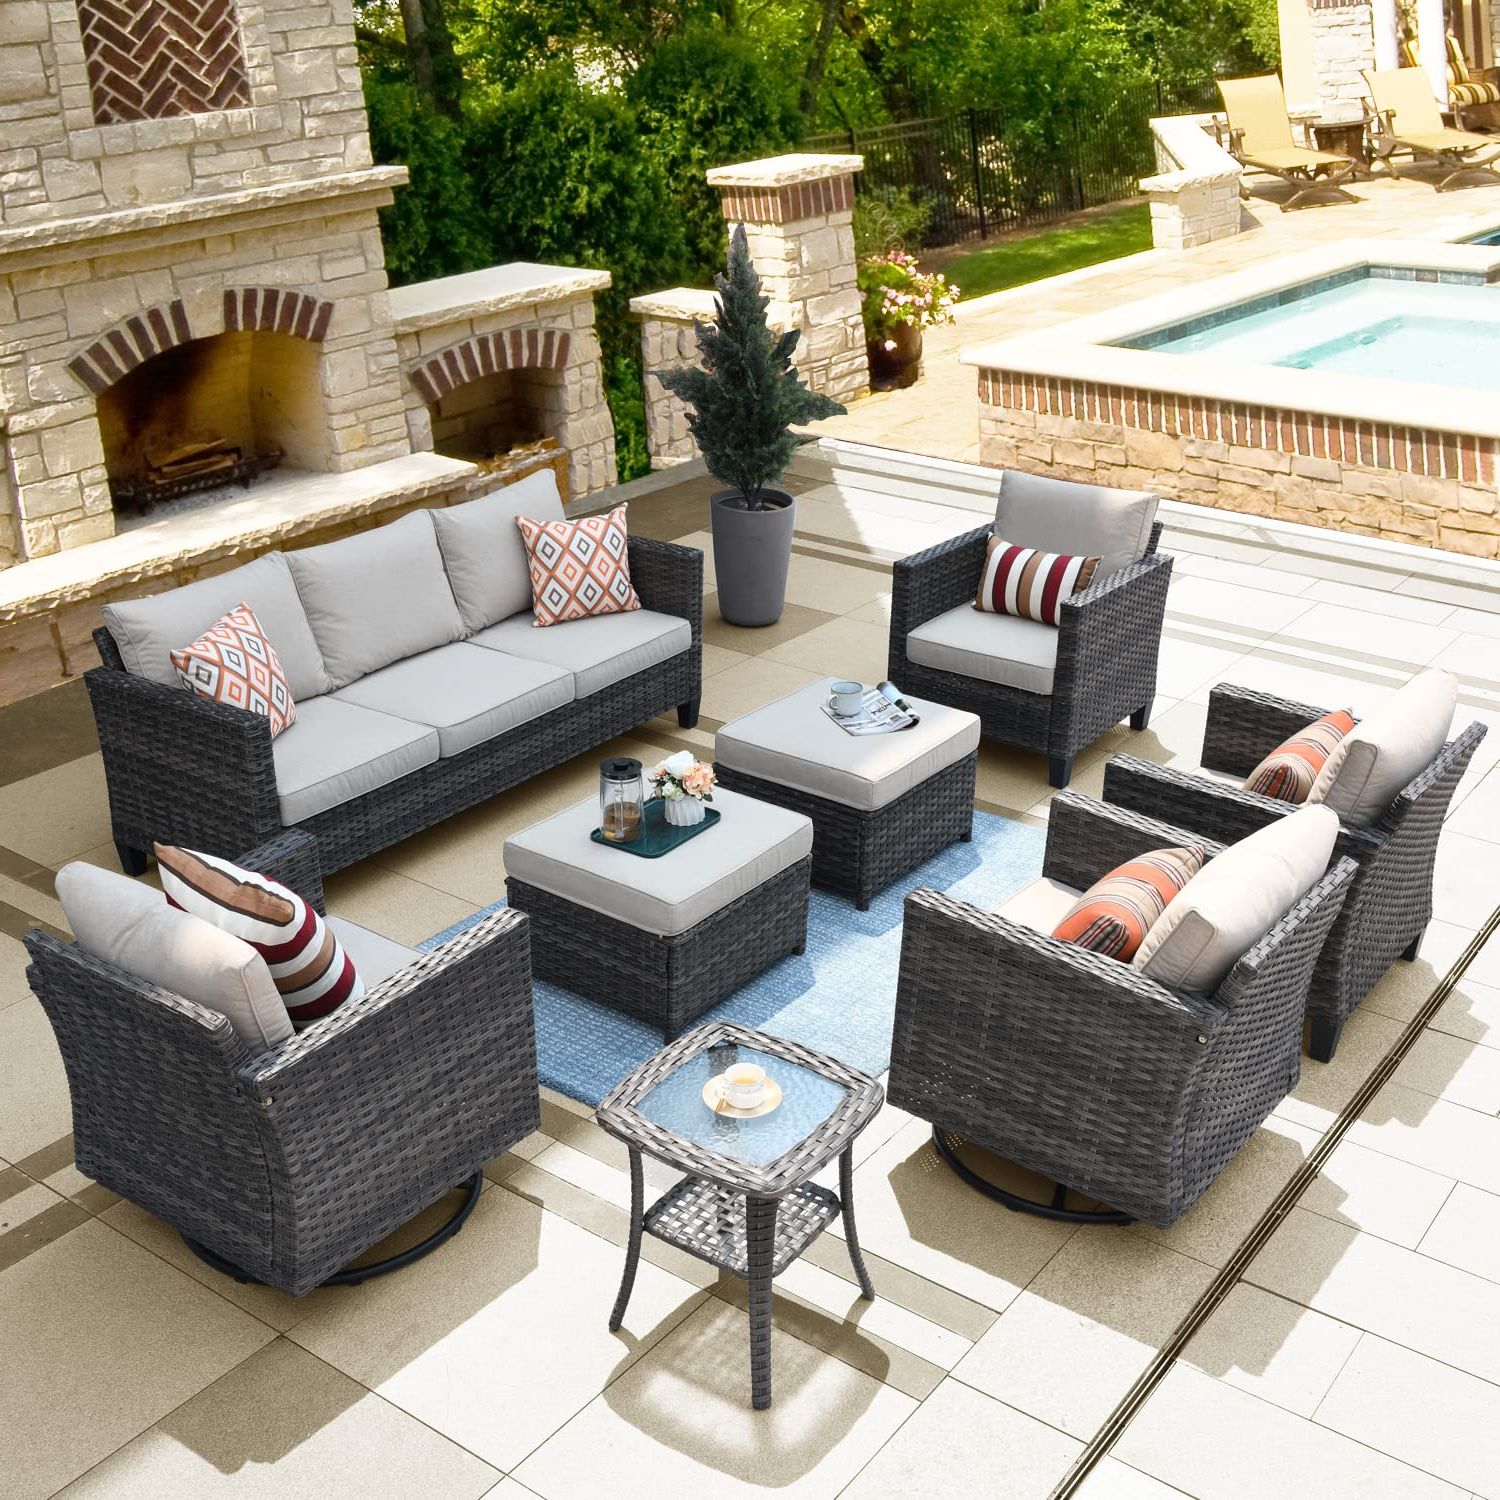 Amazon: Ovios Patio Furniture Set 8 Pcs Outdoor Wicker Rocking Swivel  Chairs Sectional Sofa Set With Single Chairs High Back Rattan Sofa For Yard  Garden Porch (beige) : Patio, Lawn & Garden With Regard To Famous 8 Pcs Outdoor Patio Furniture Set (View 4 of 15)